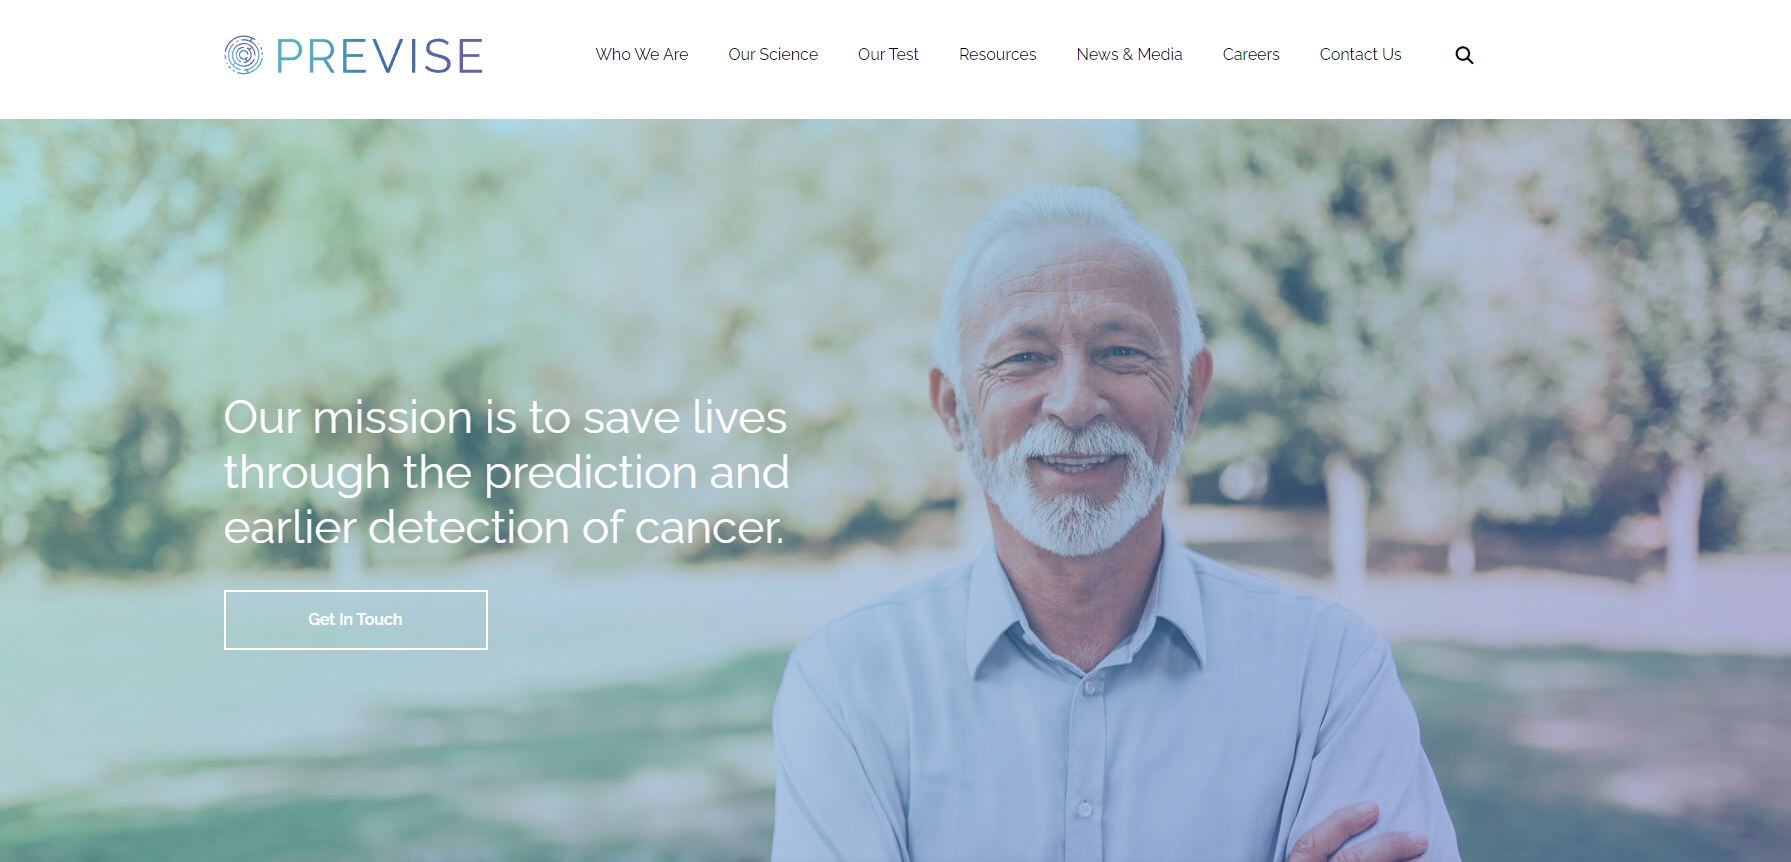 The biotechnology research company PREVISE has recently raised $3 million in seed funding from investors